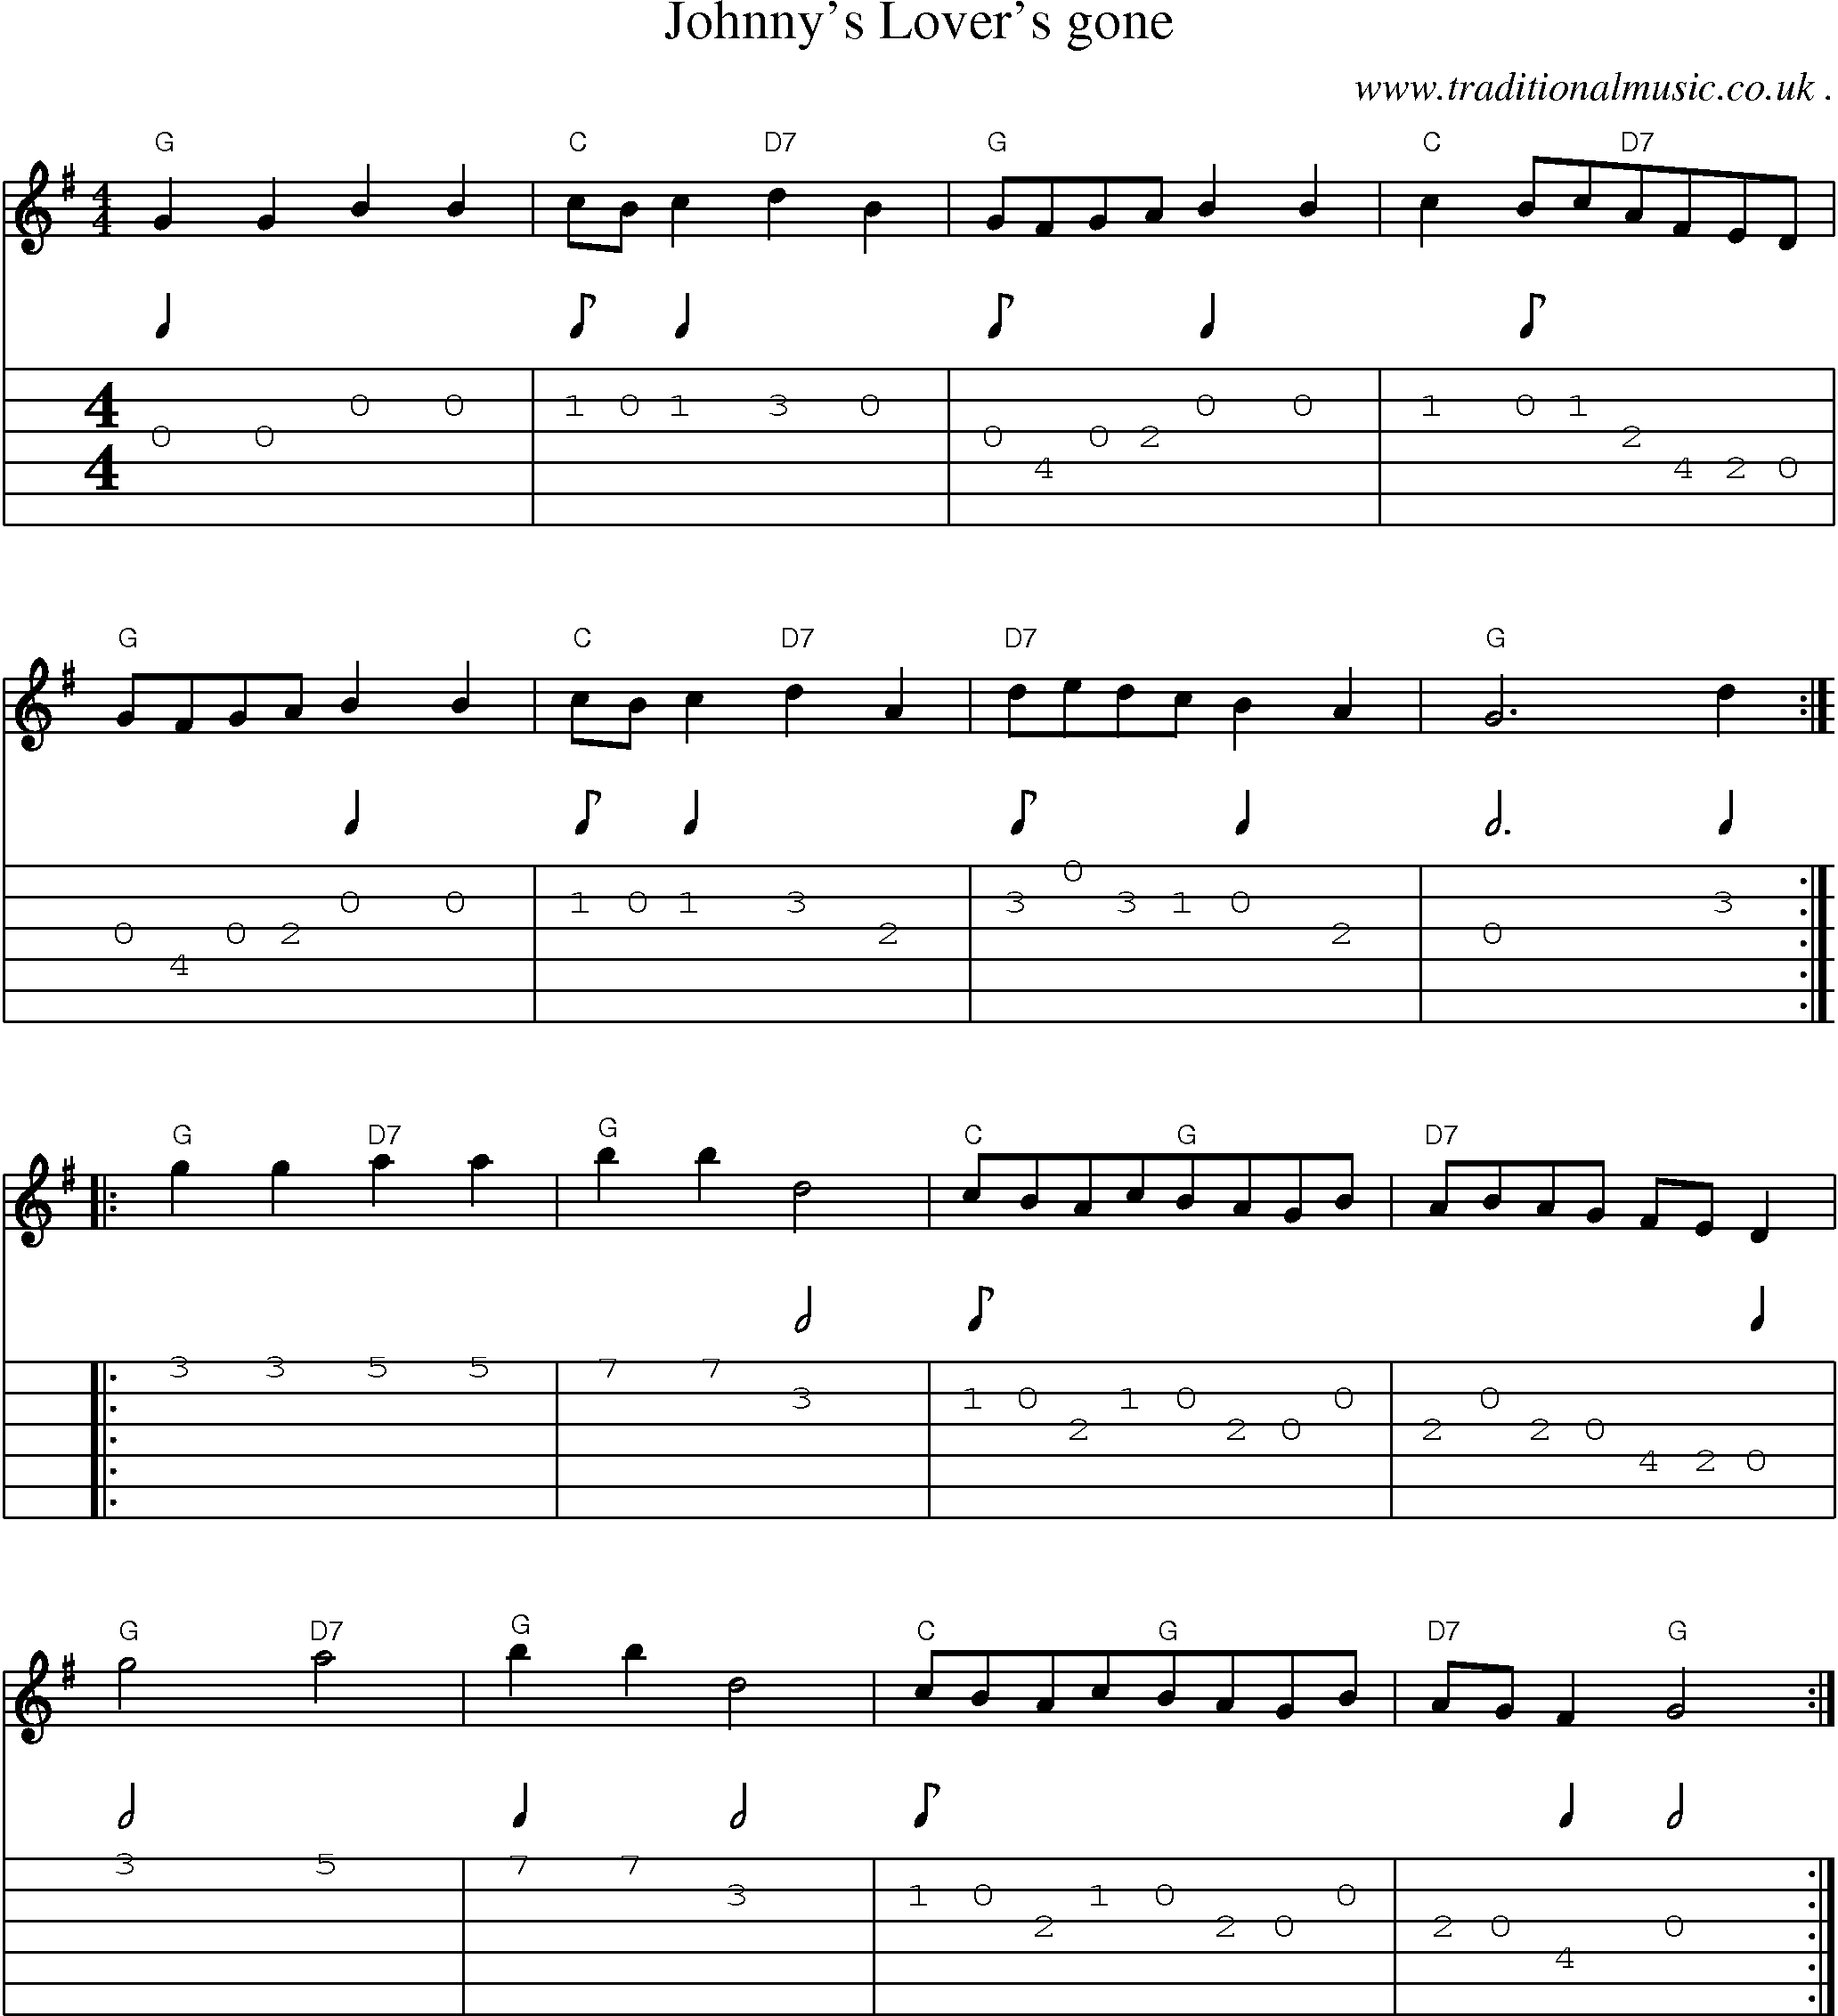 Sheet-Music and Guitar Tabs for Johnnys Lovers Gone